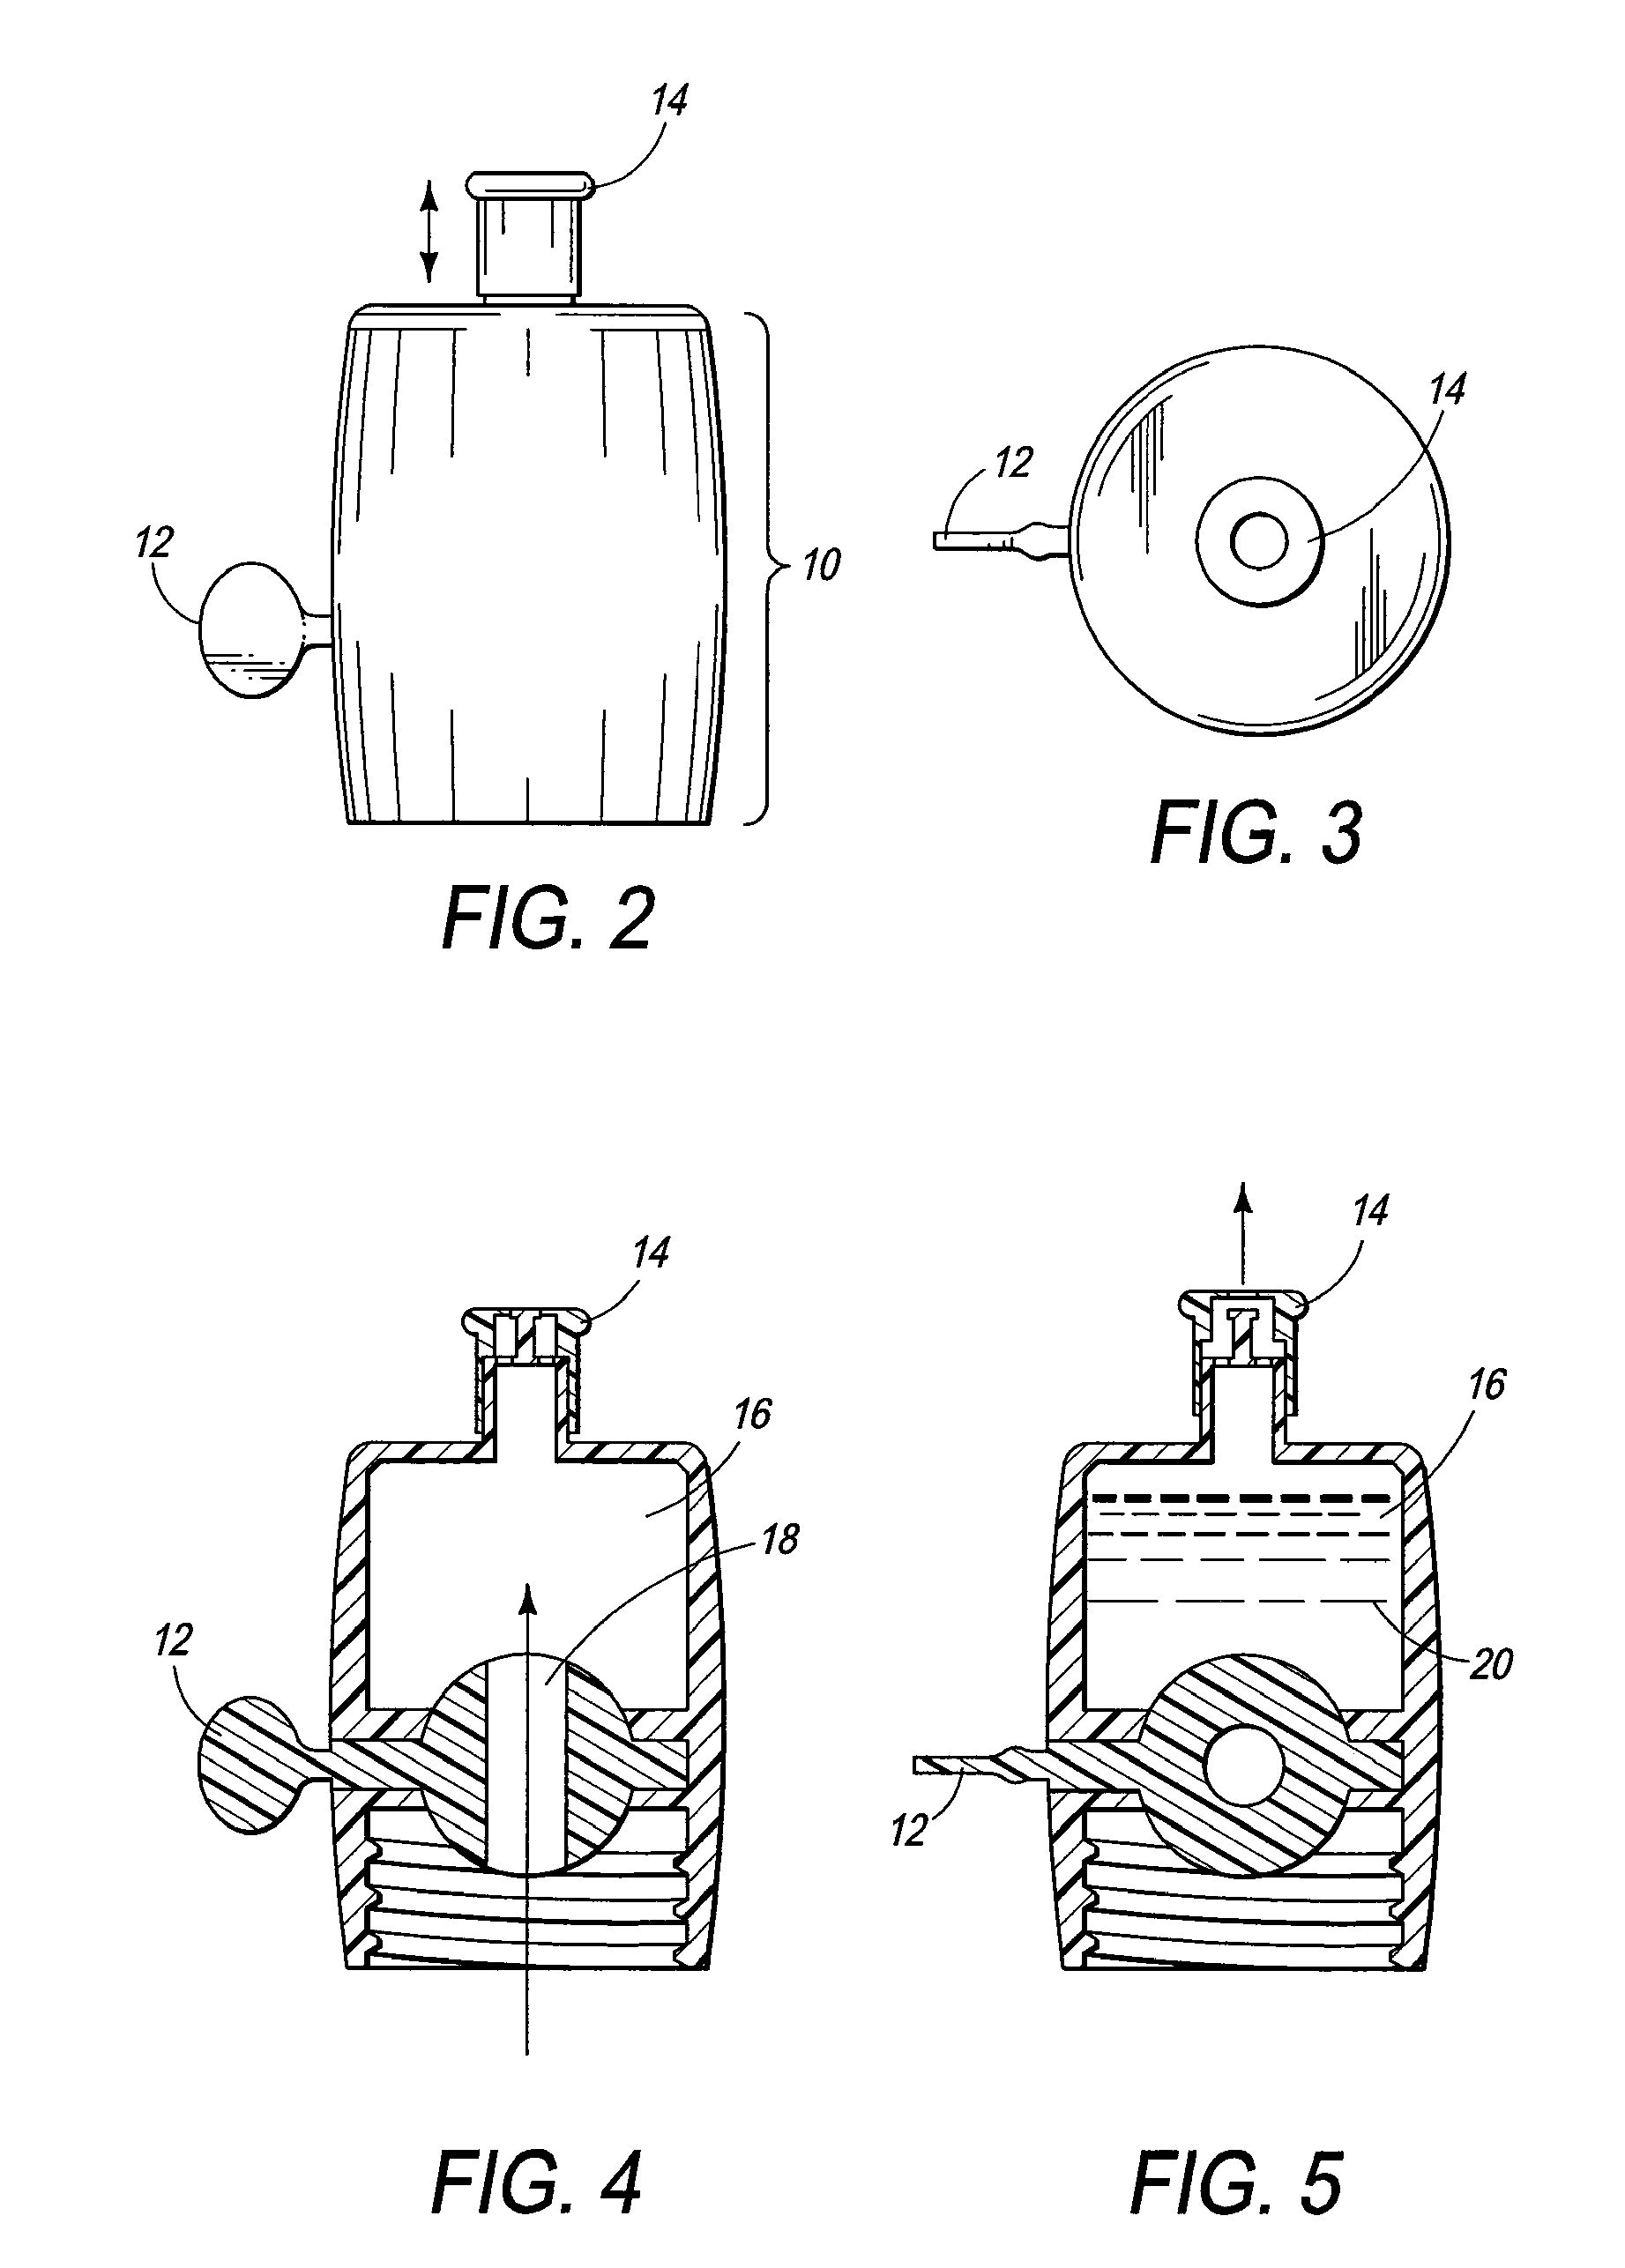 Liquid measuring device and method of using same